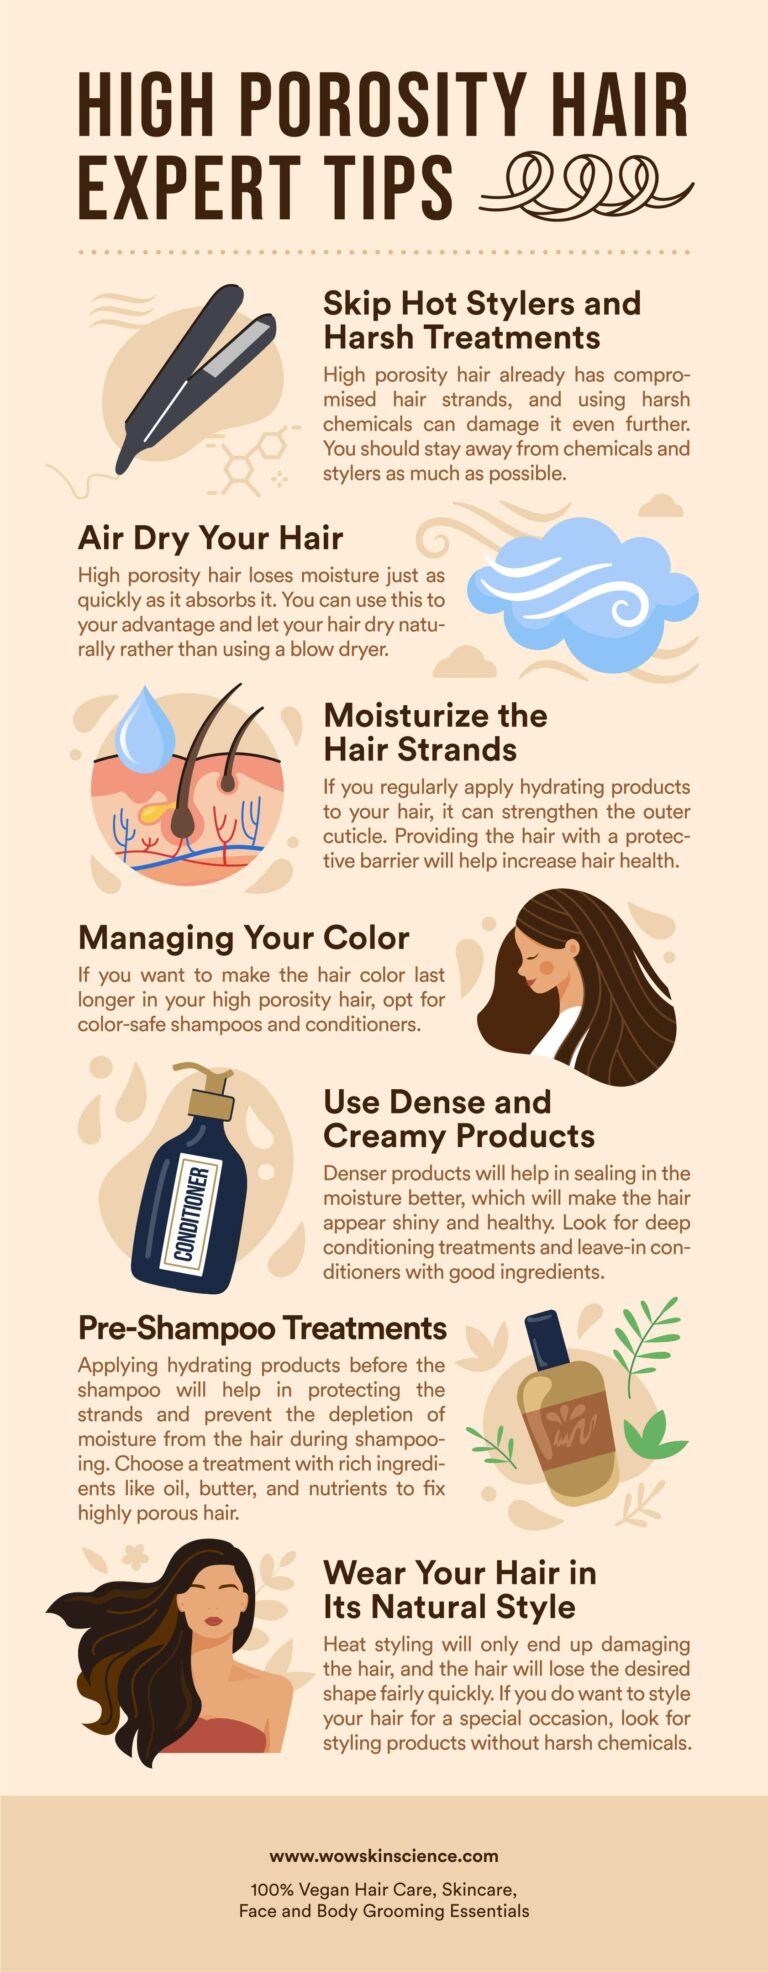 The Best Hair Care Tips for Every Occasion